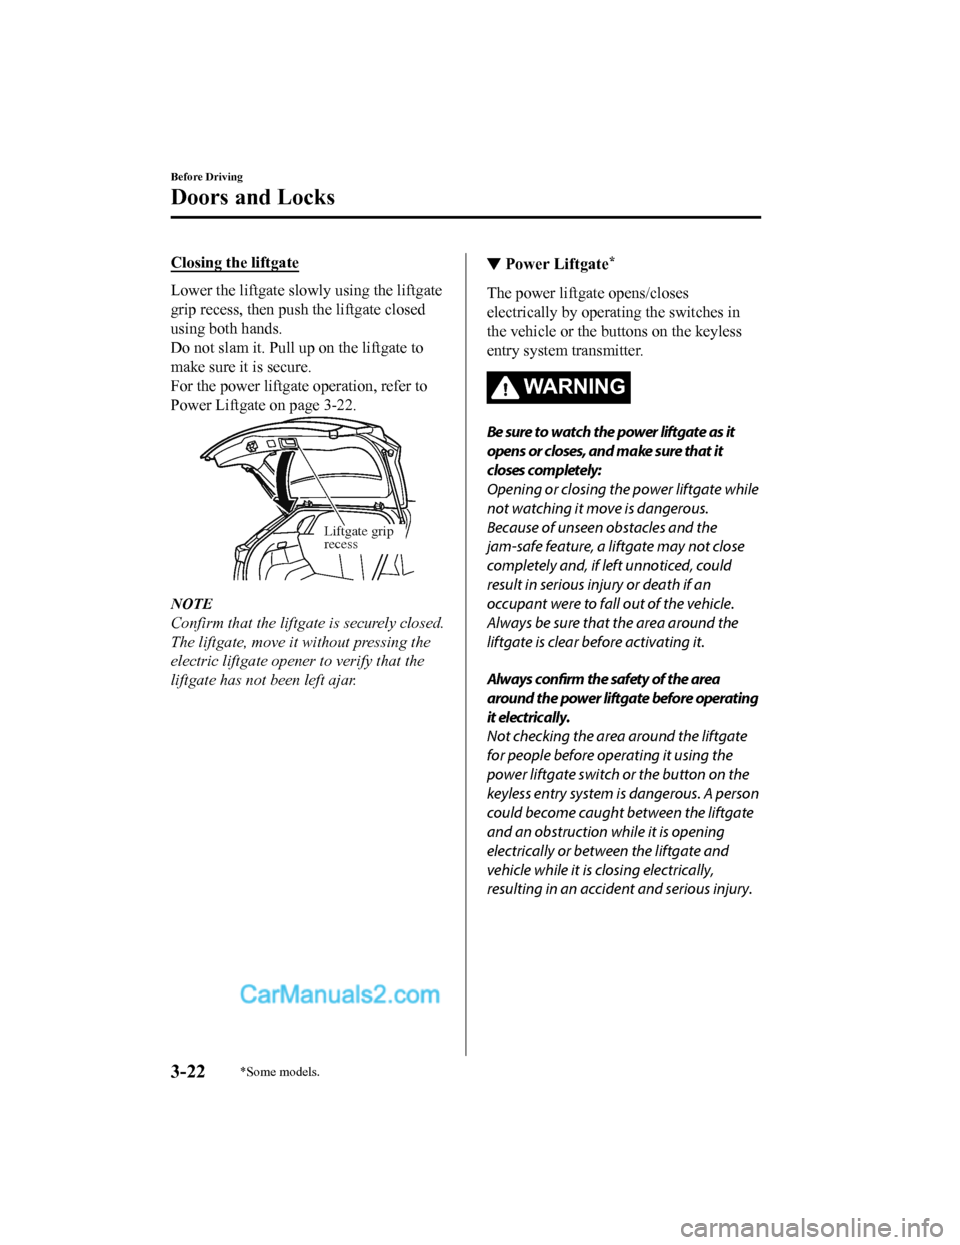 MAZDA MODEL CX-5 2018  Owners Manual (in English) Closing the liftgate
Lower the liftgate slowly using the liftgate
grip recess, then push the liftgate closed
using both hands.
Do not slam it. Pull up  on the liftgate to
make sure it is secure.
For t